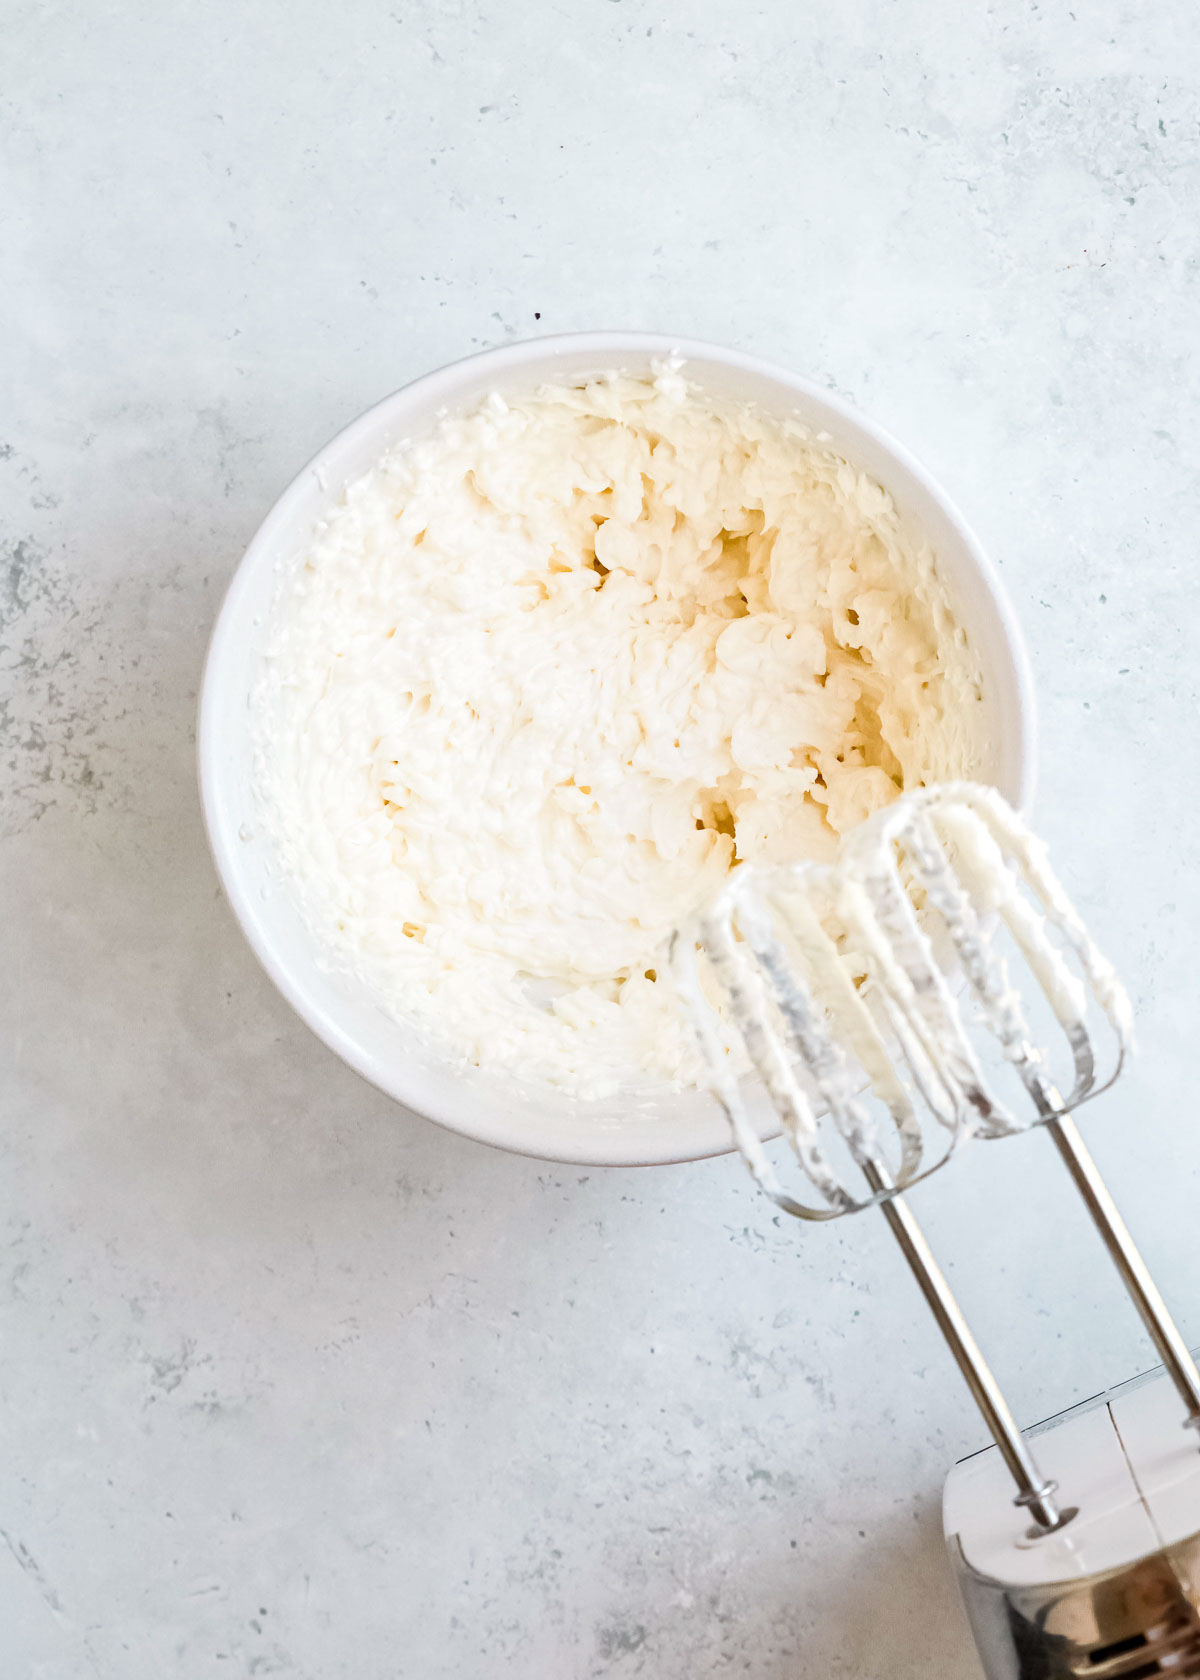 an electric mixer dirtied with creamed yogurt, cream cheese, and mayonnaise